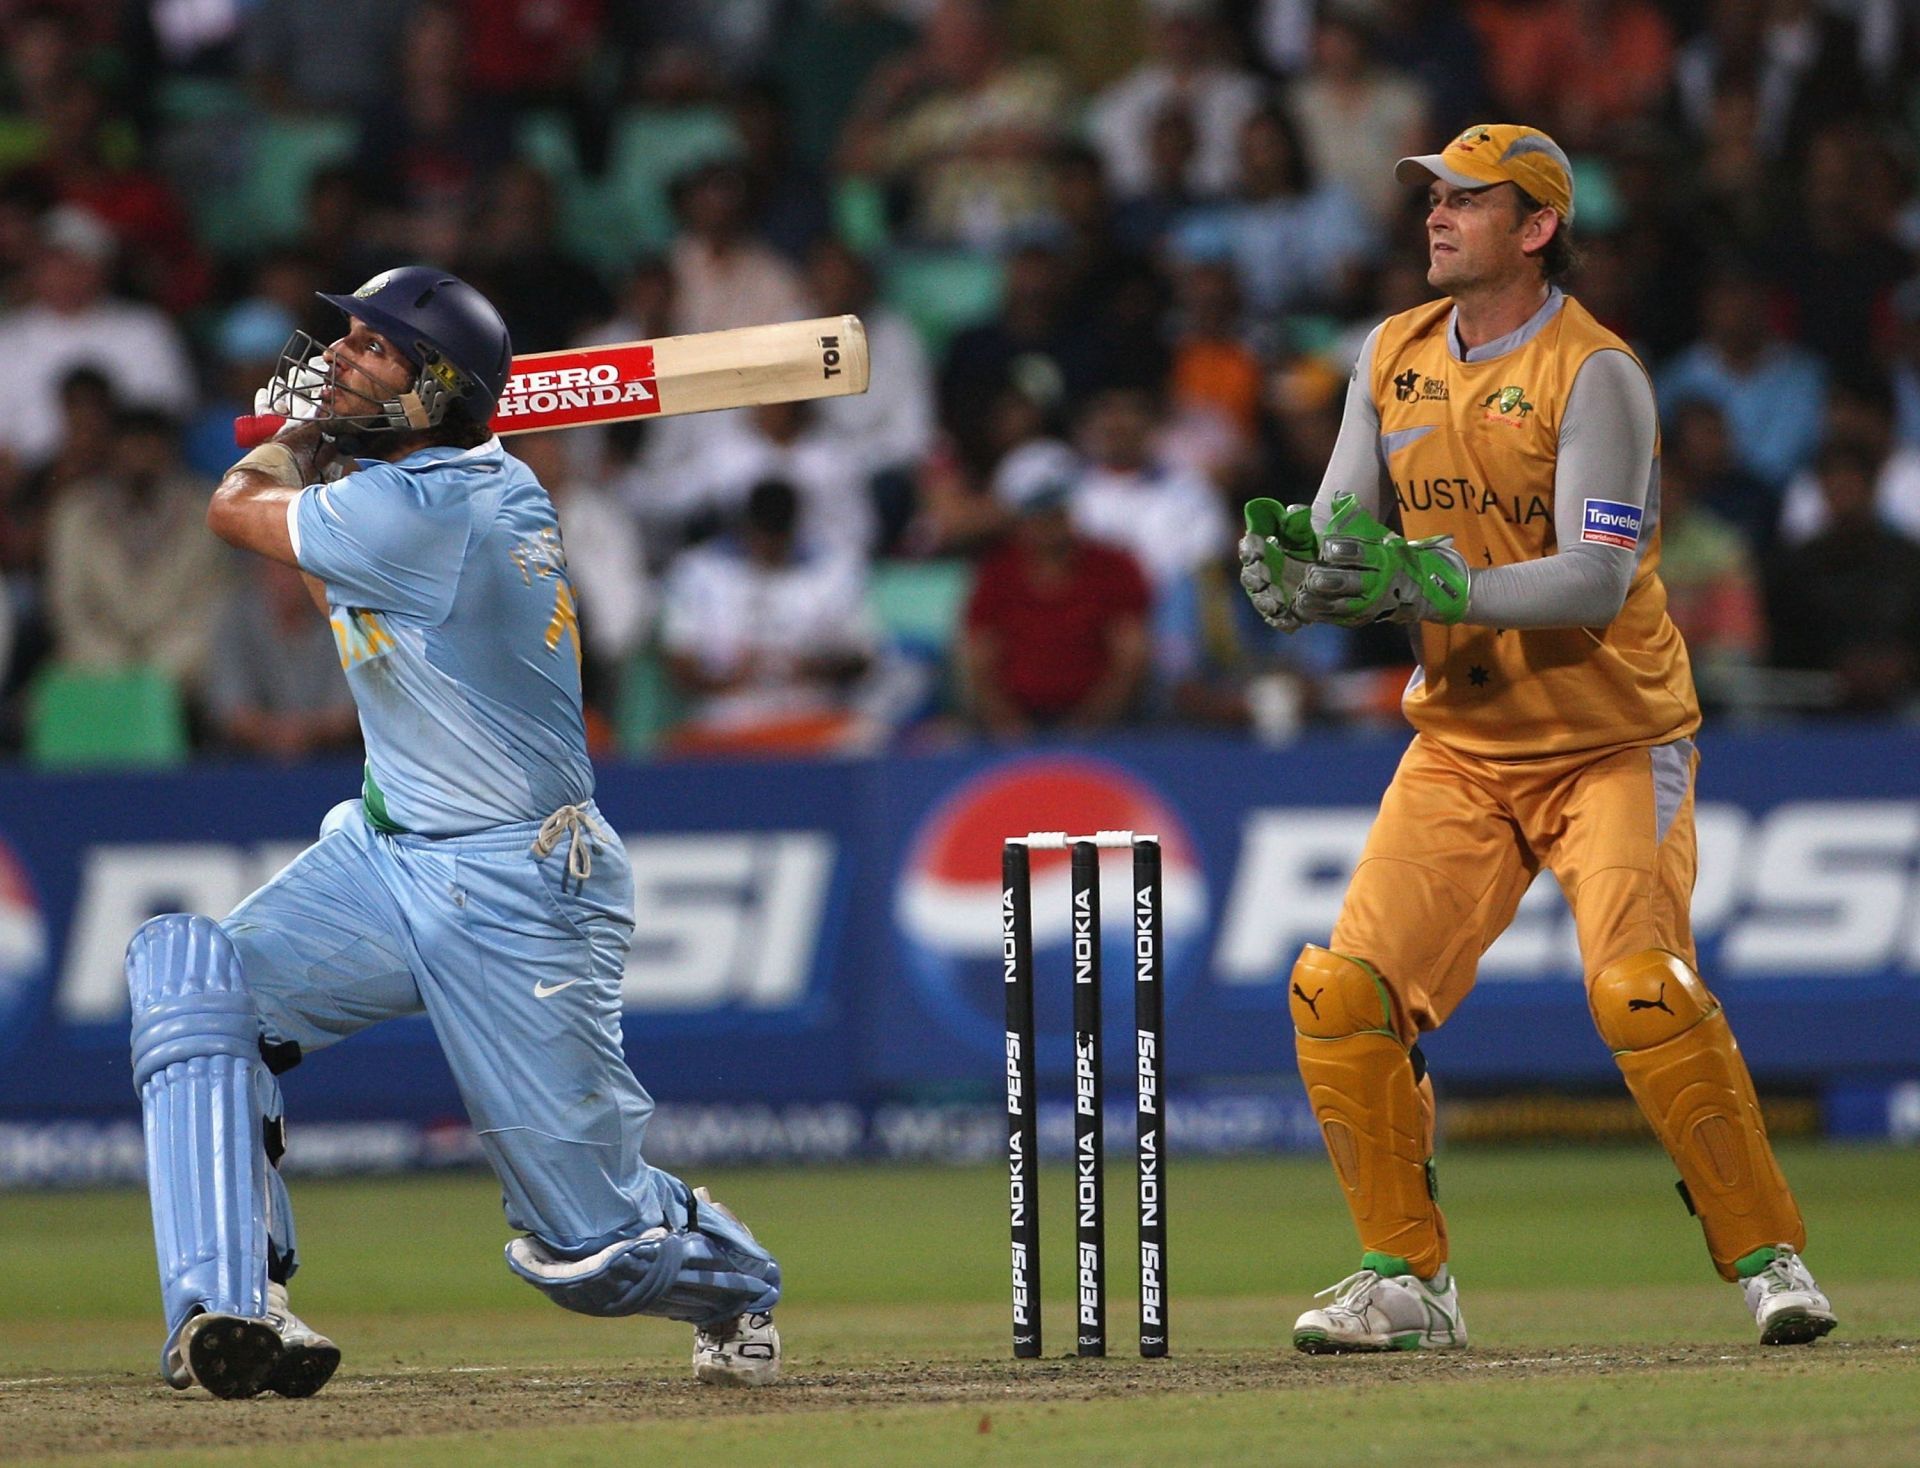 A Yuvraj Singh special helped India beat Australia in the 2007 T20 World Cup semifinal